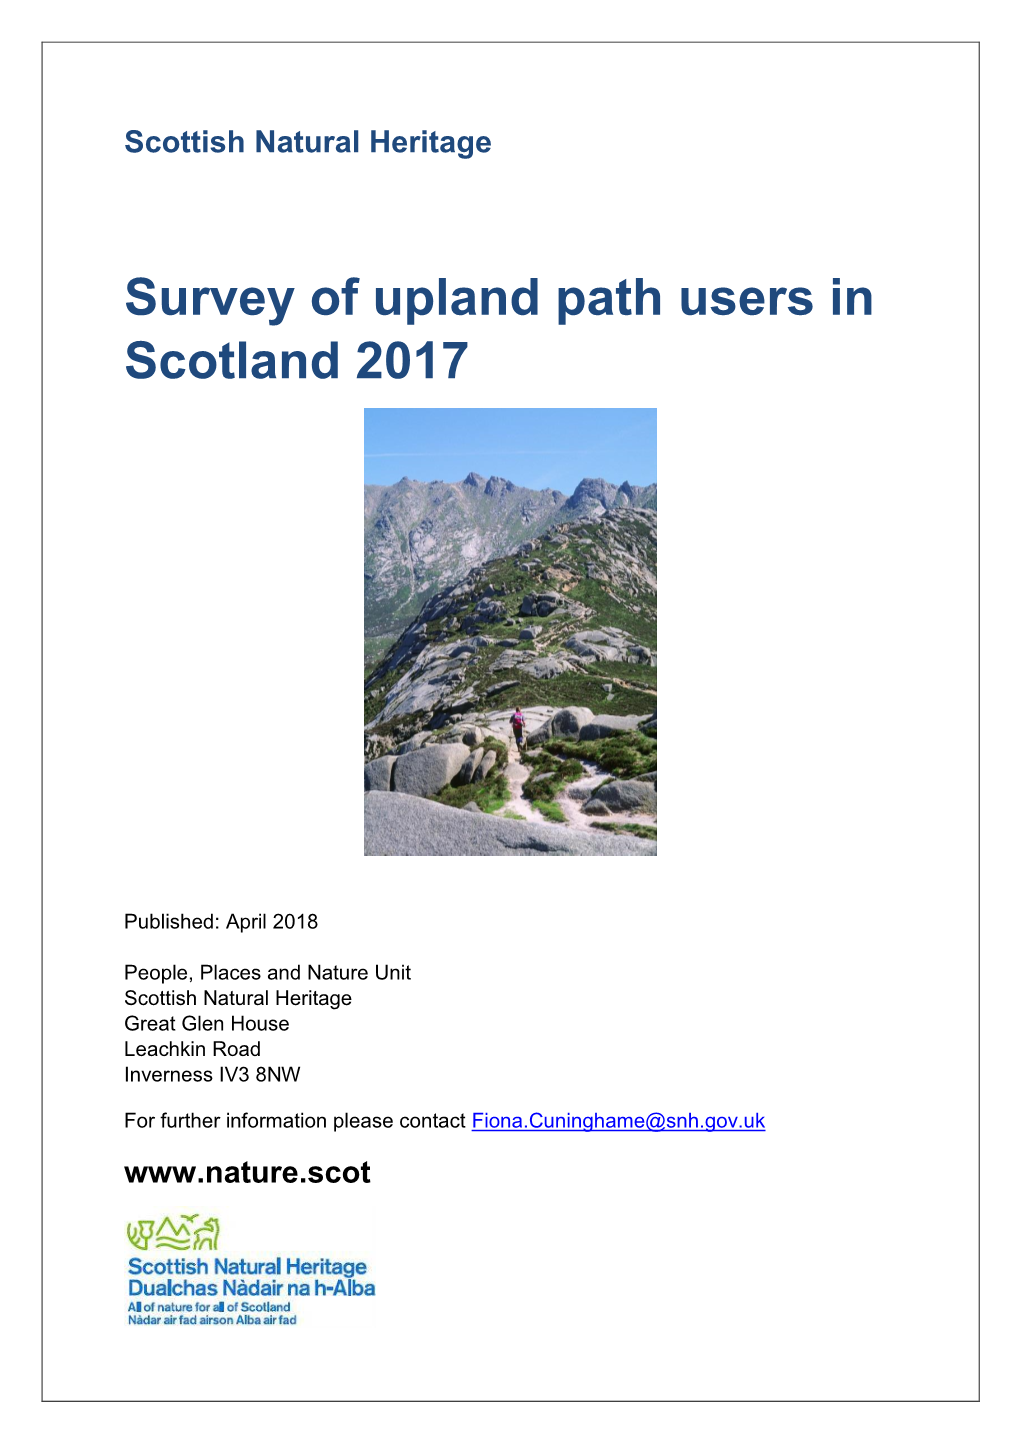 Survey of Upland Path Users in Scotland 2017